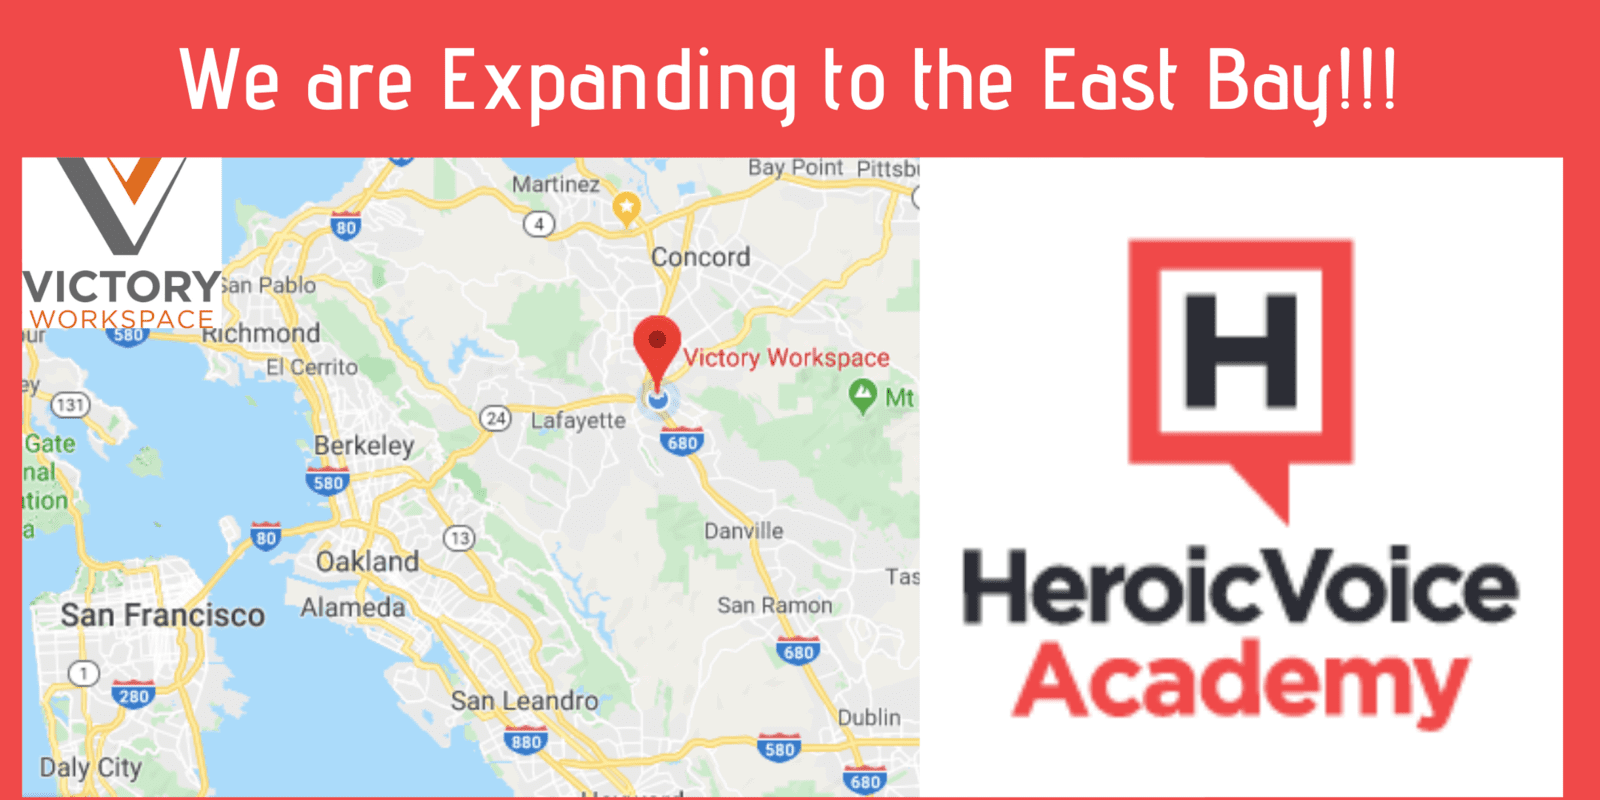 We are expanding to the East Bay